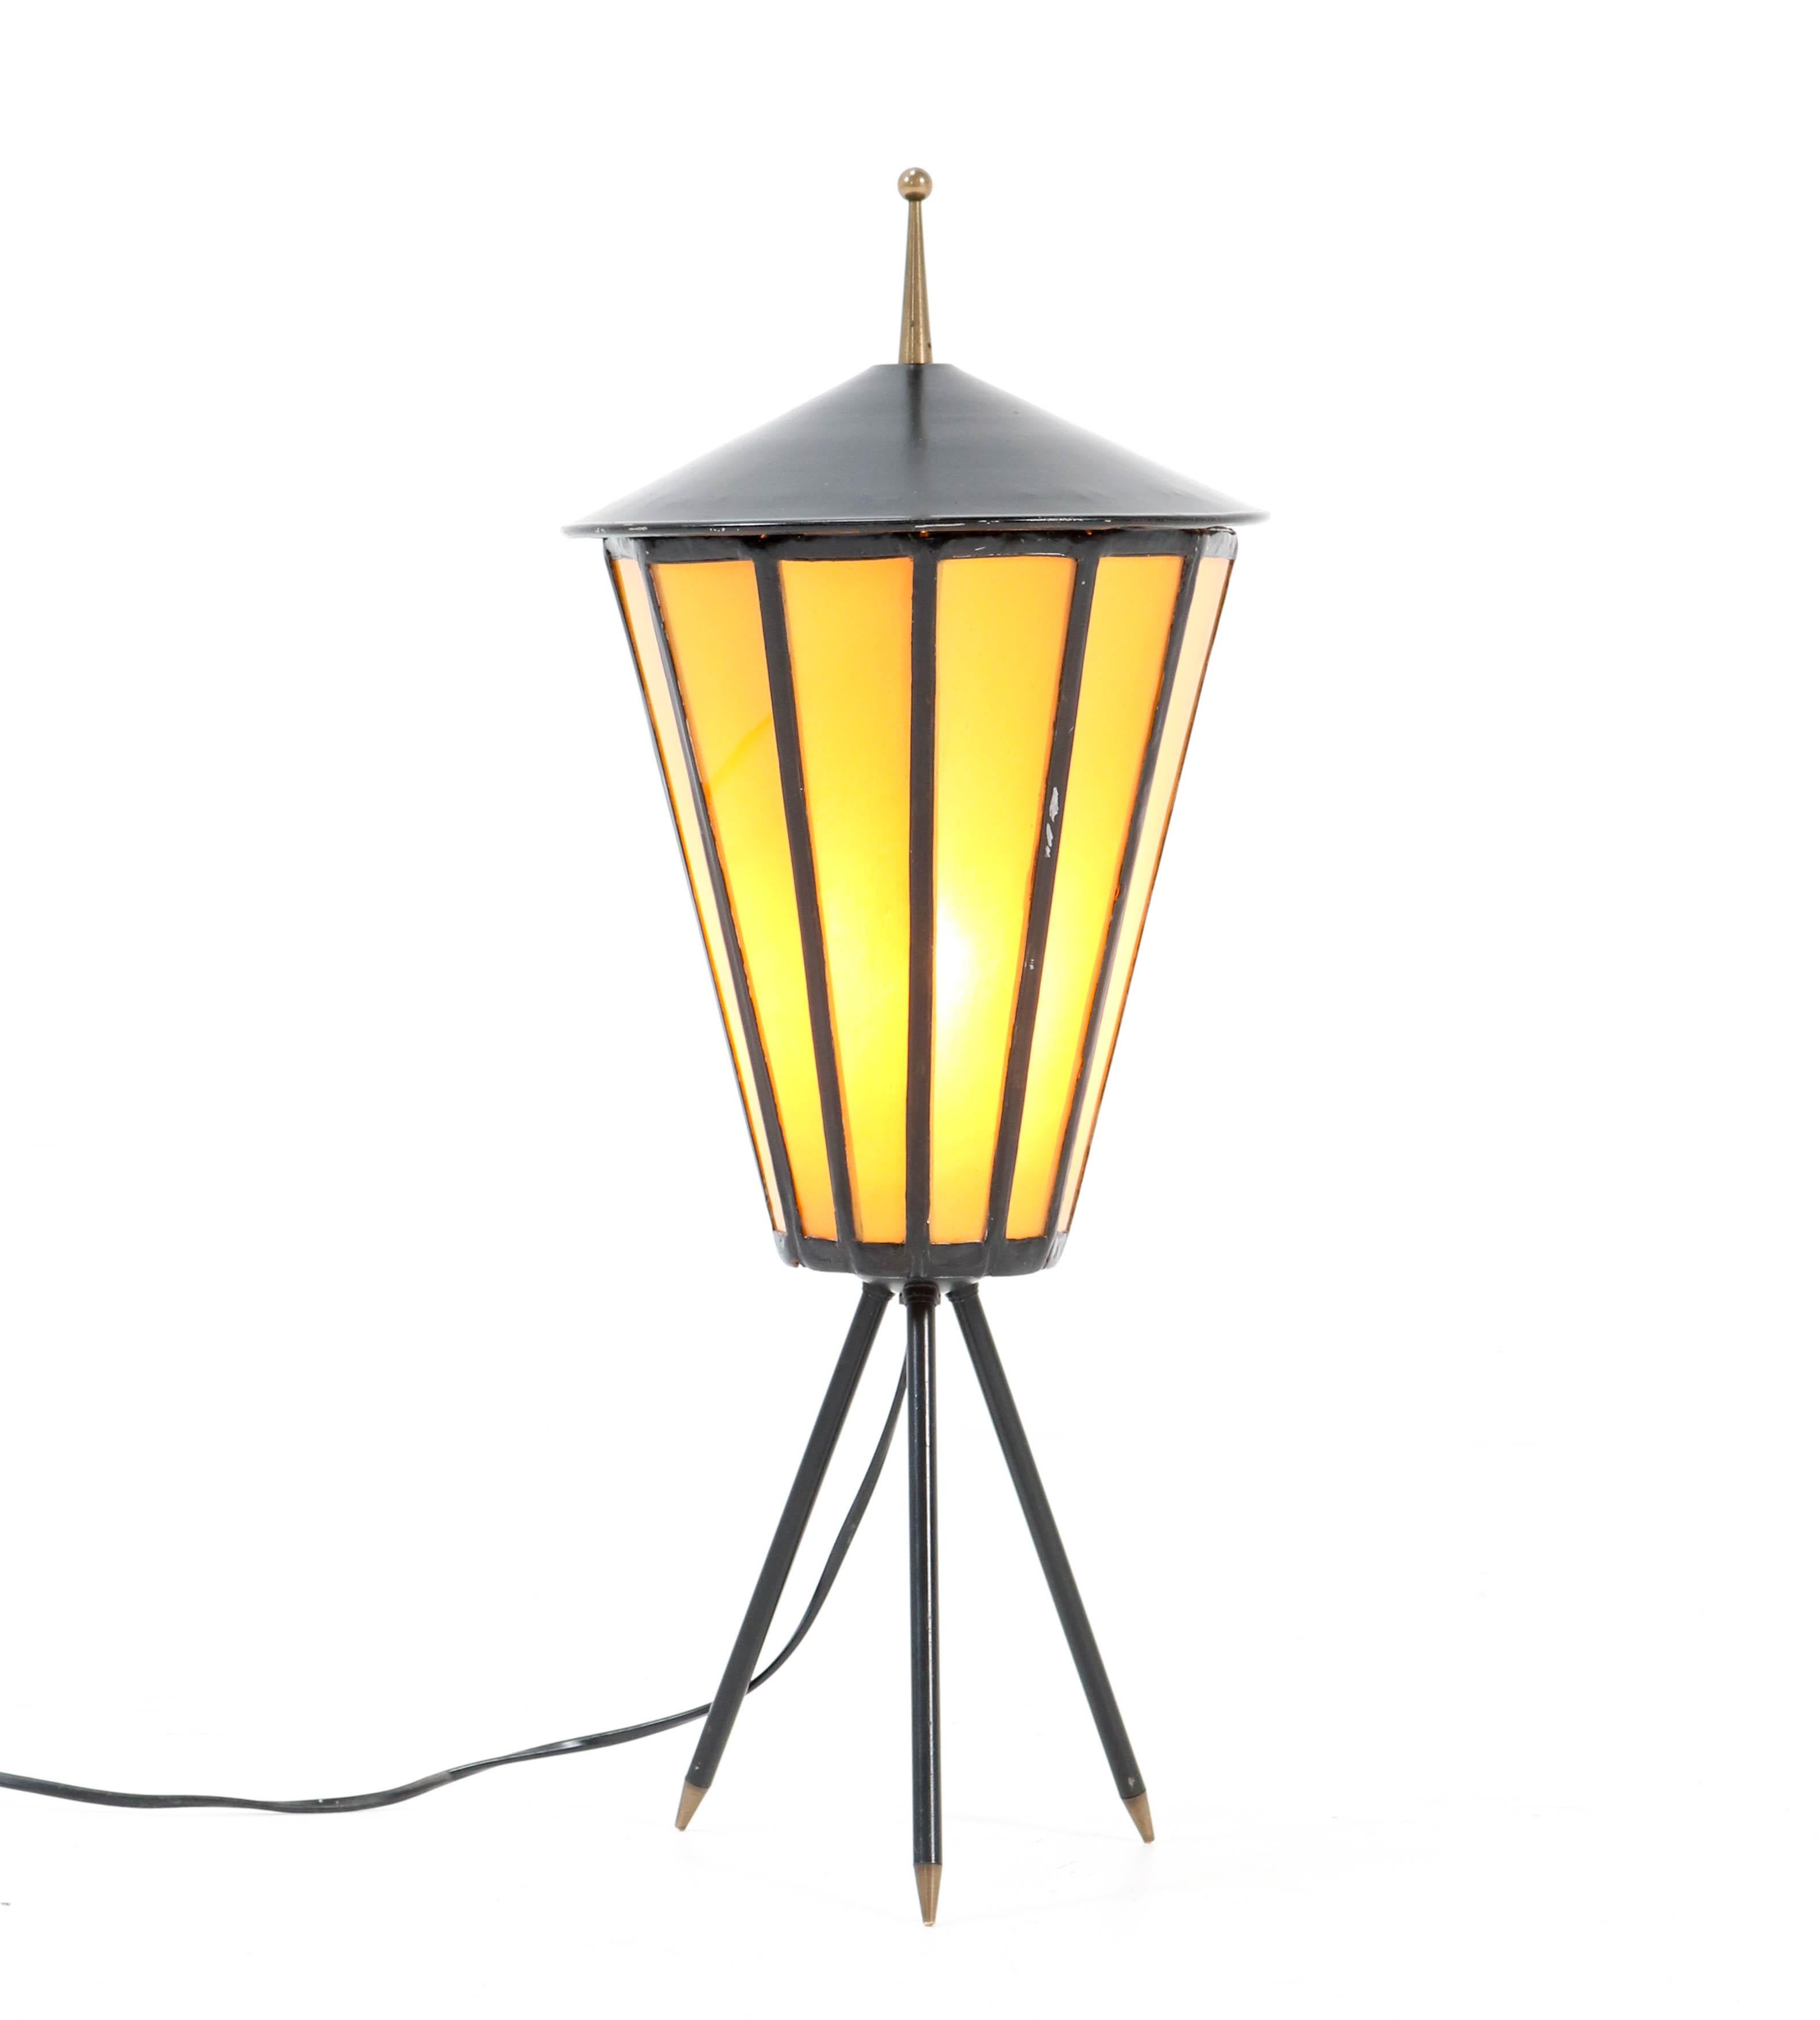 Stunning Mid-Century Modern table lamp.
Striking French design from the 1950s.
Black lacquered metal base on tripod legs.
Original yellow colored glass.
Rewired with a socket for E27 light bulb.